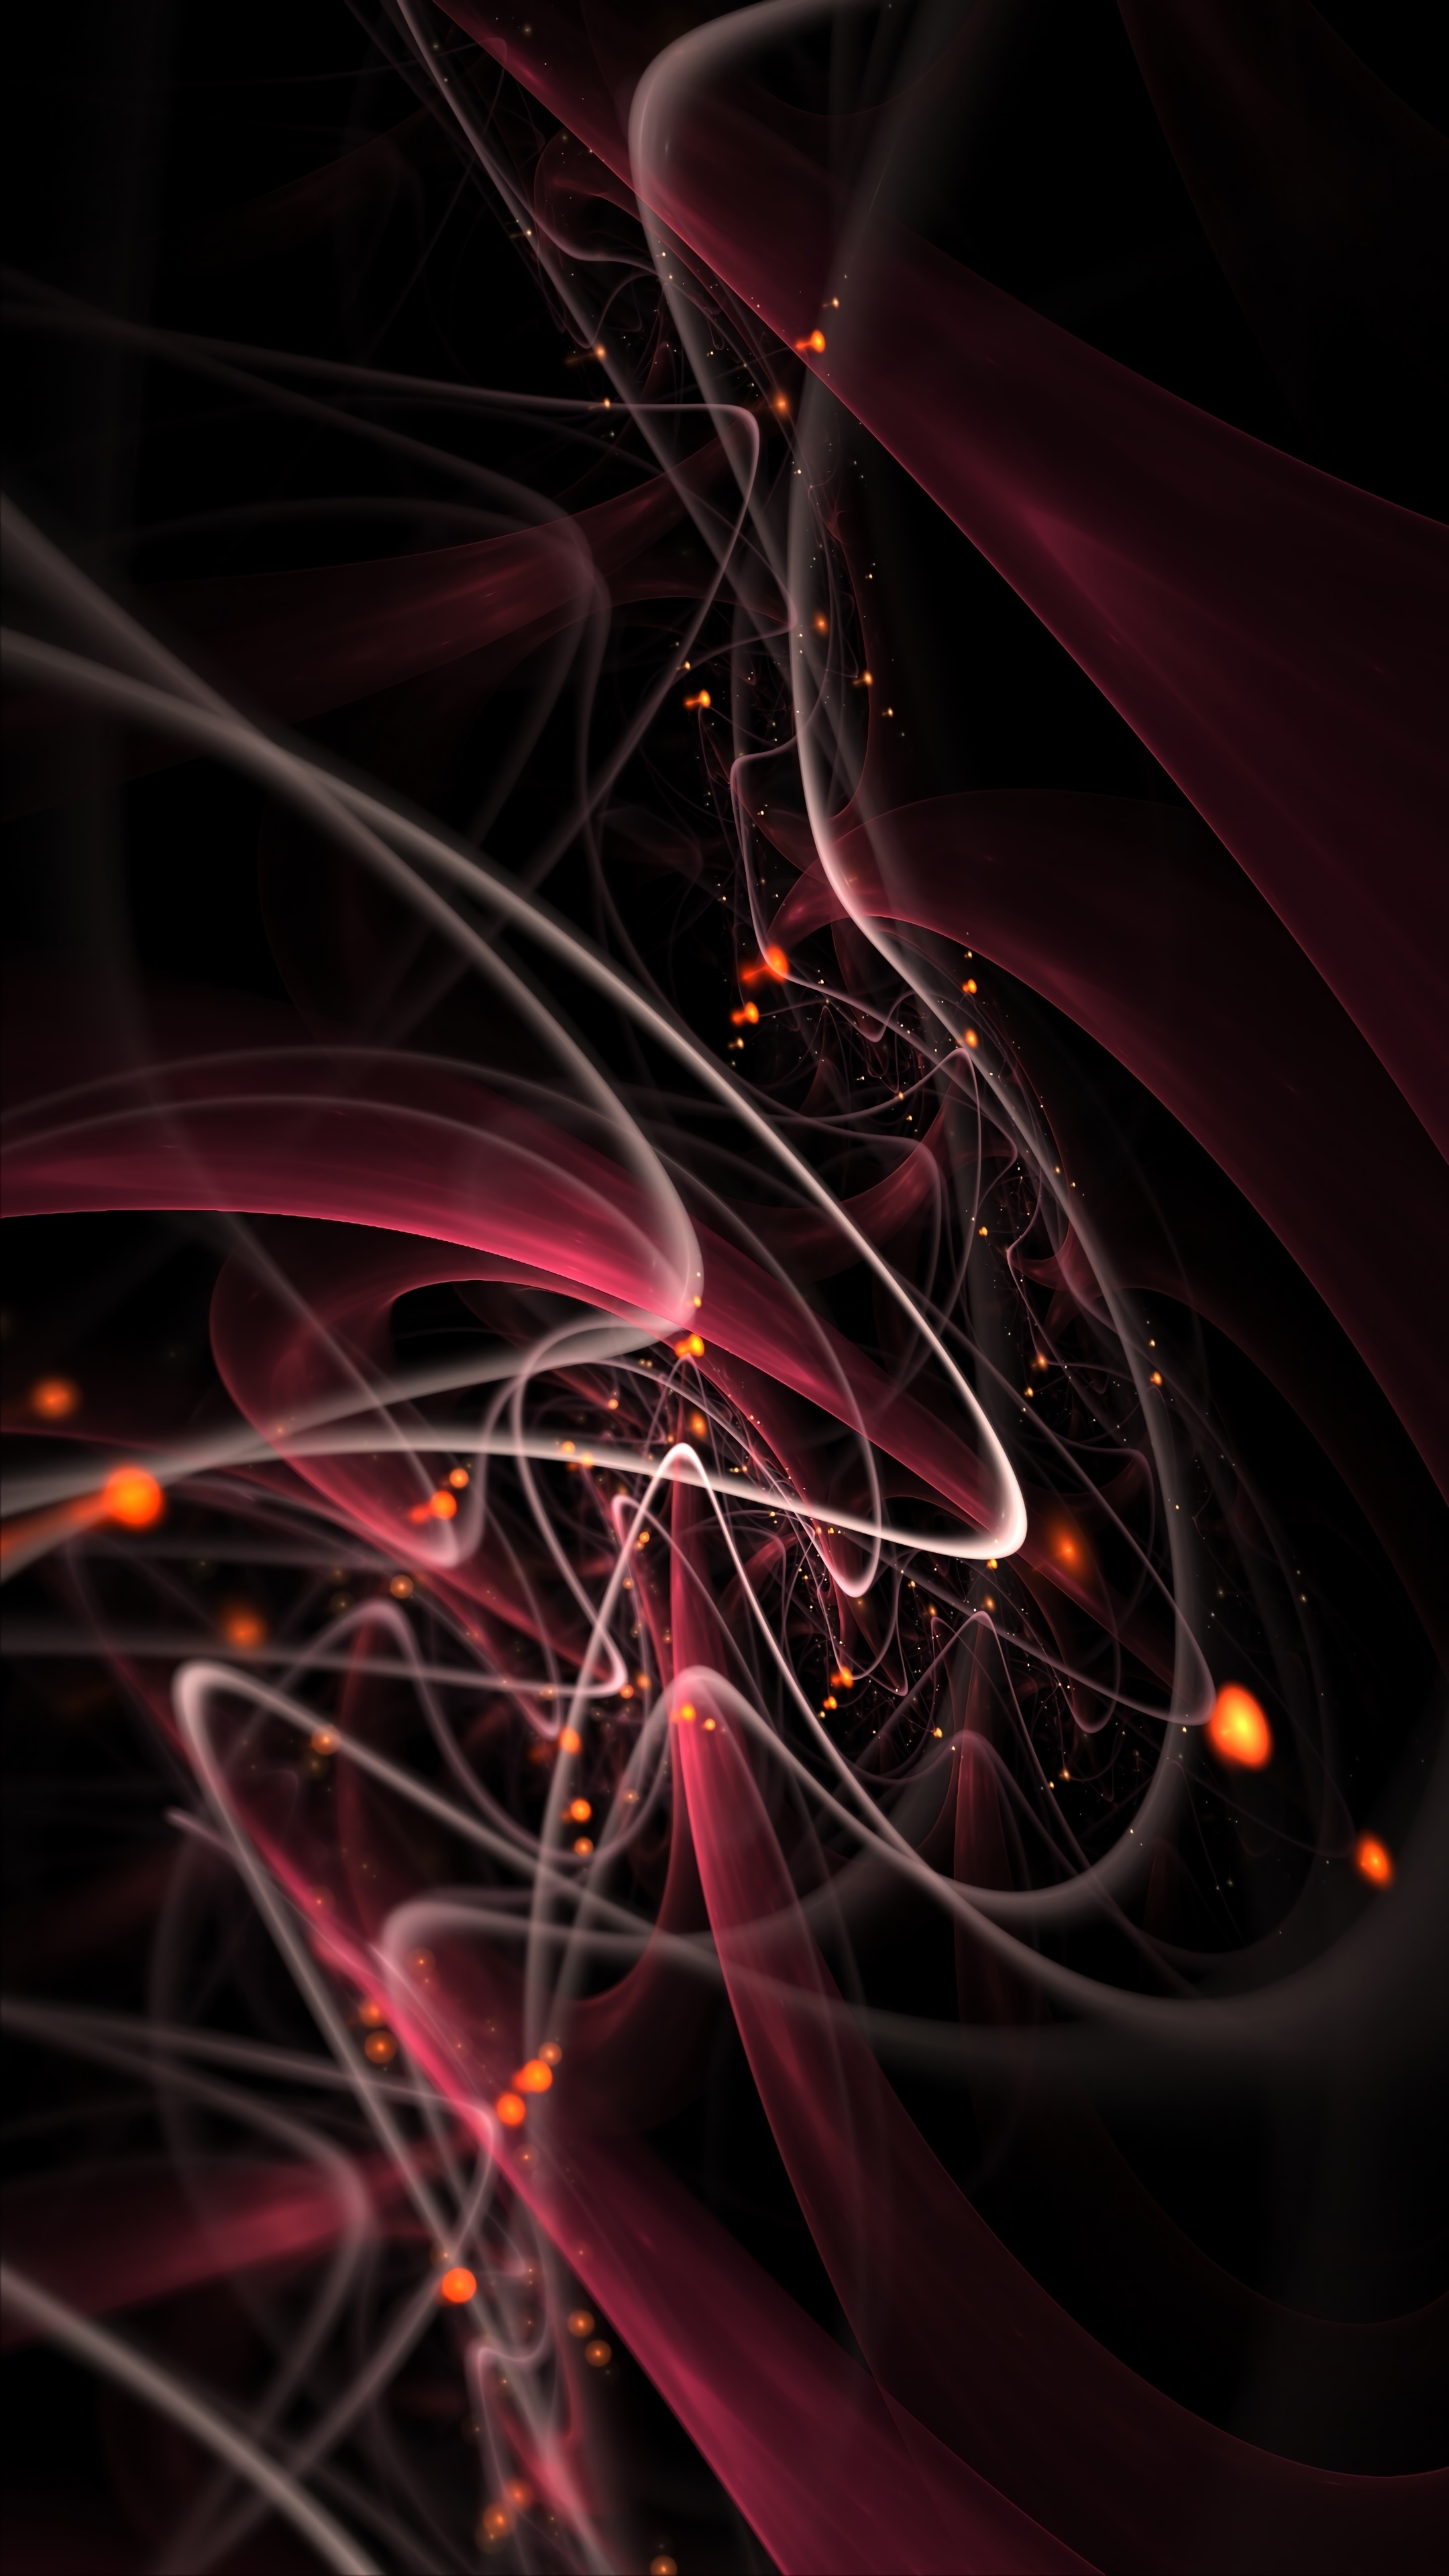 Download Wallpaper 2160x3840 Fractal Lines Bends Curves 2160p Sony Xperia Z5 Premium Dual 2160x3840 Hd Background 156